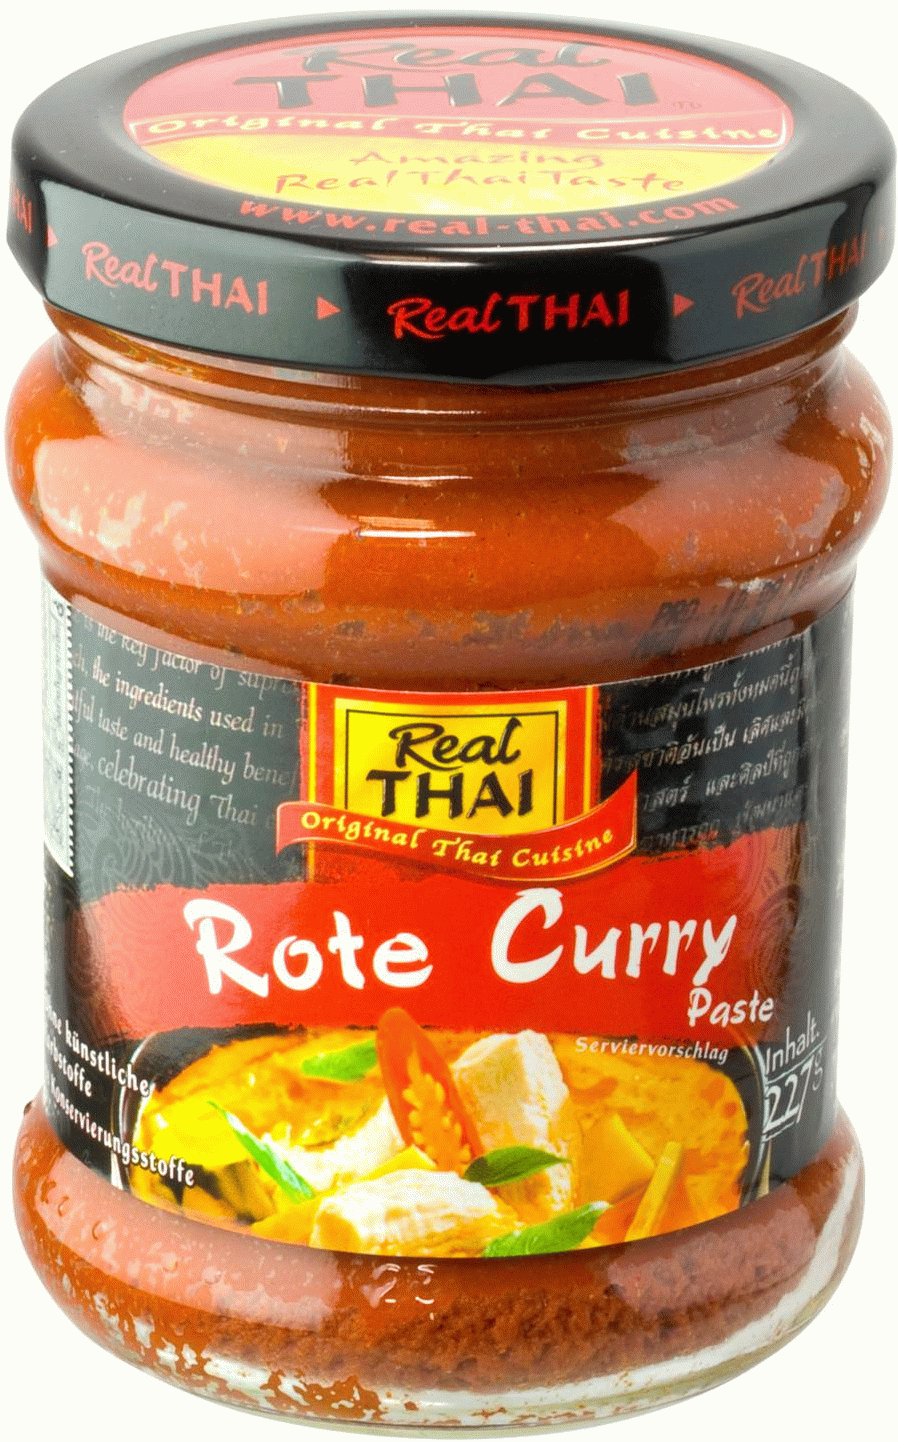 Real Thai Rote Curry Paste